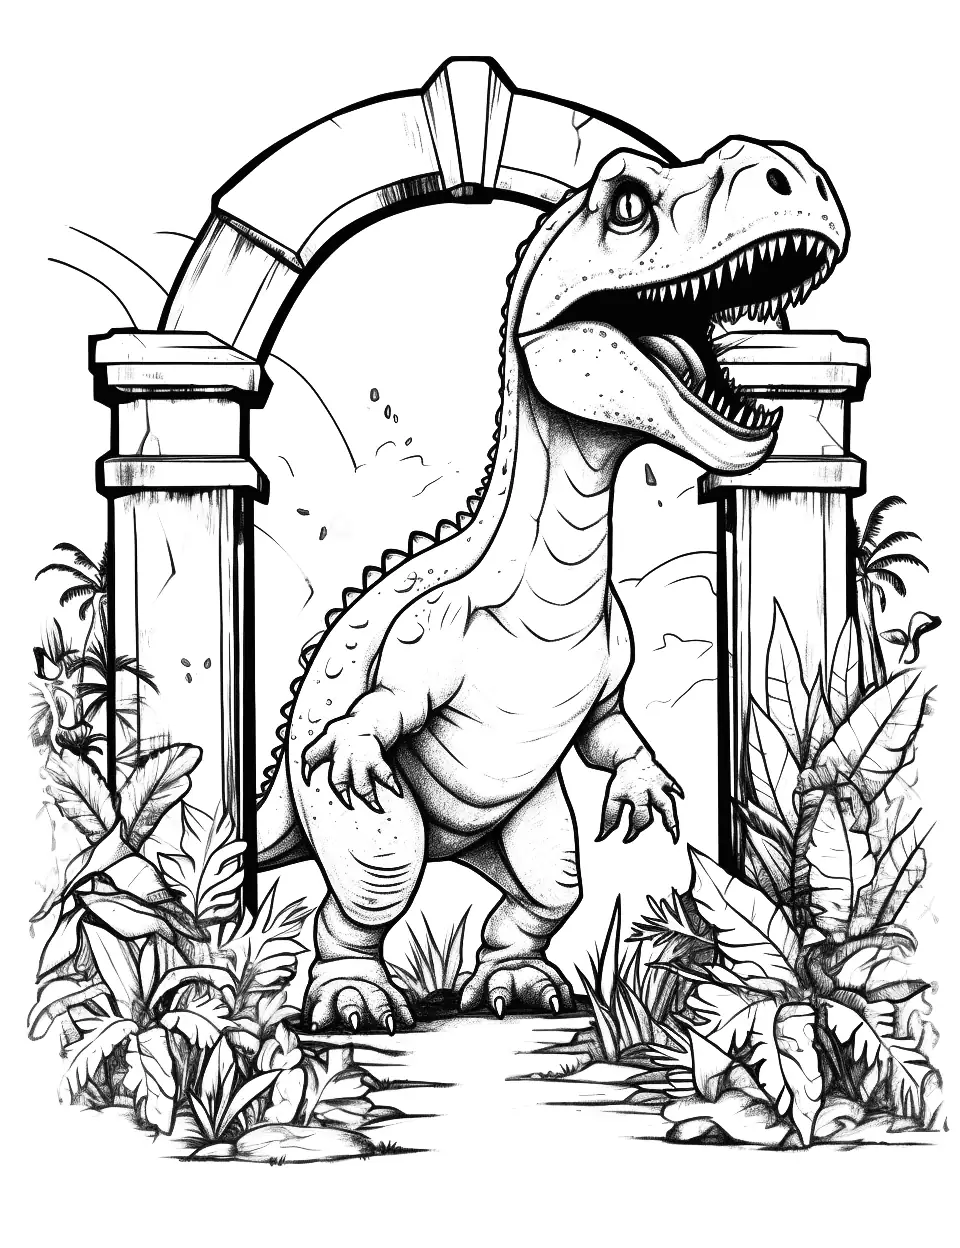 Jurassic World Gates Coloring Page - The iconic gates of Jurassic World with a roaring T-Rex in the background.